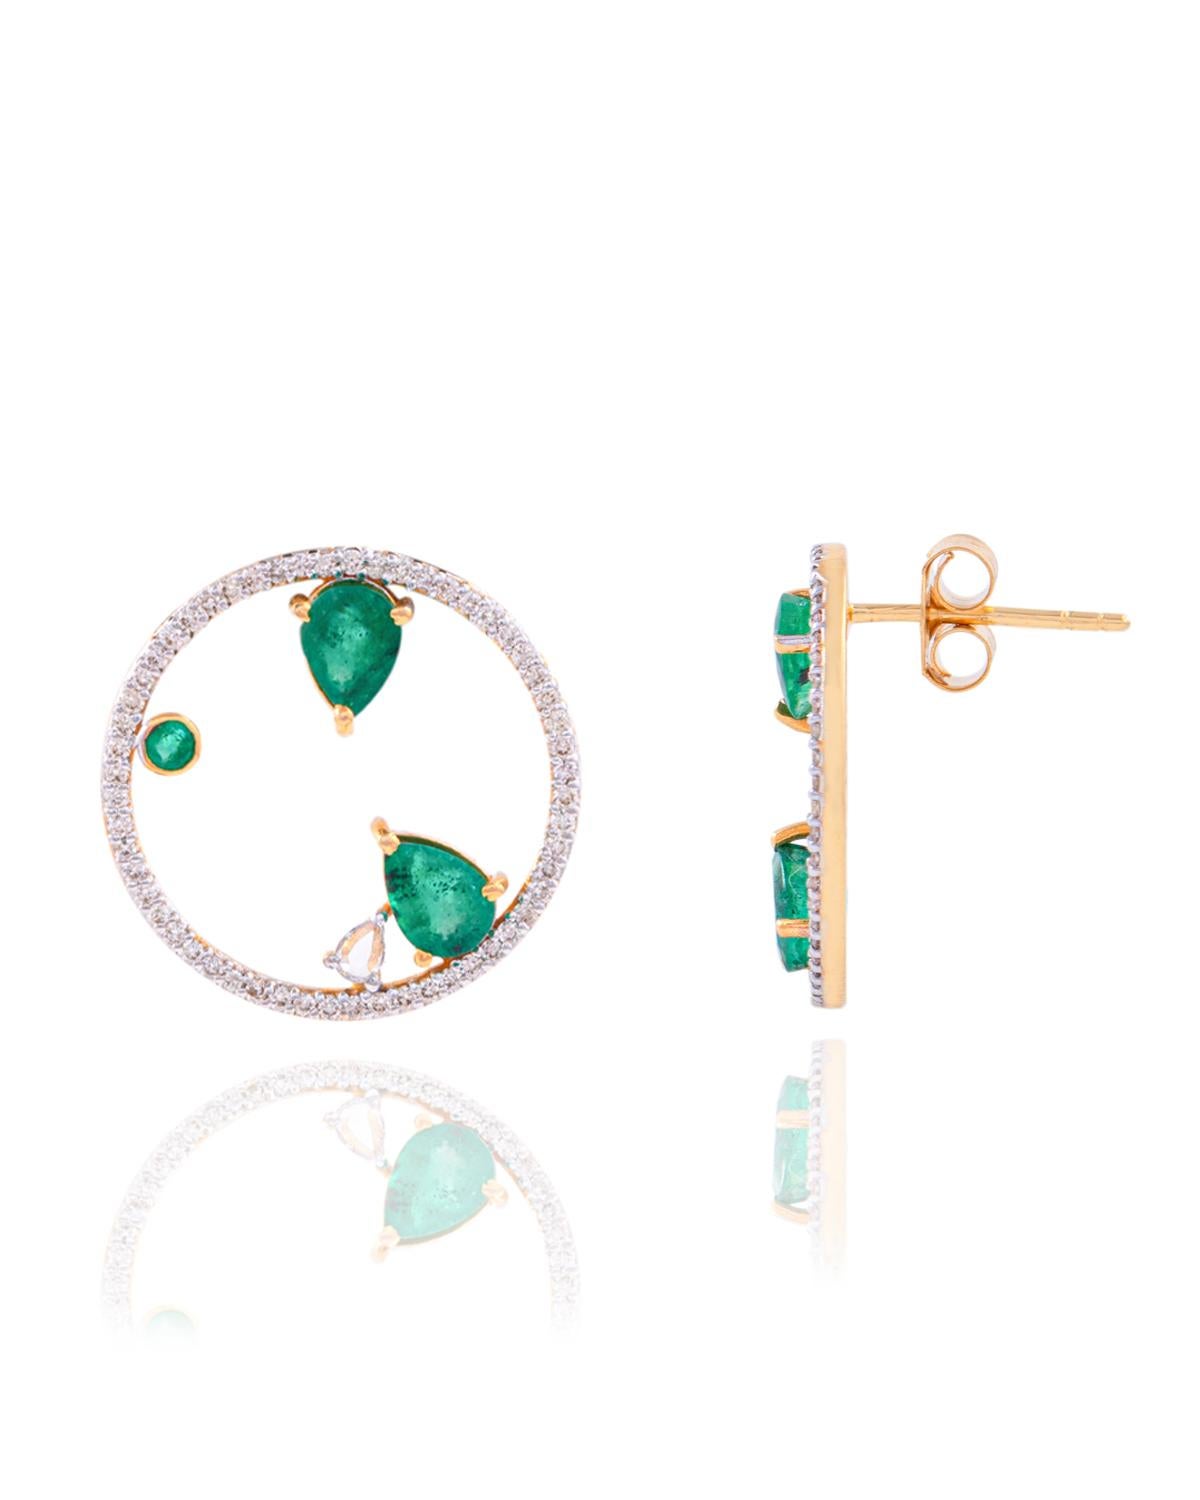 These earrings are made with Emerald gemstones and diamond. They are set in 14K gold. Shine all day long in this delicate pair of stud earrings. Perfect for gifting, they twinkle with timeless elegance. Easy to mix and match with other jewellery